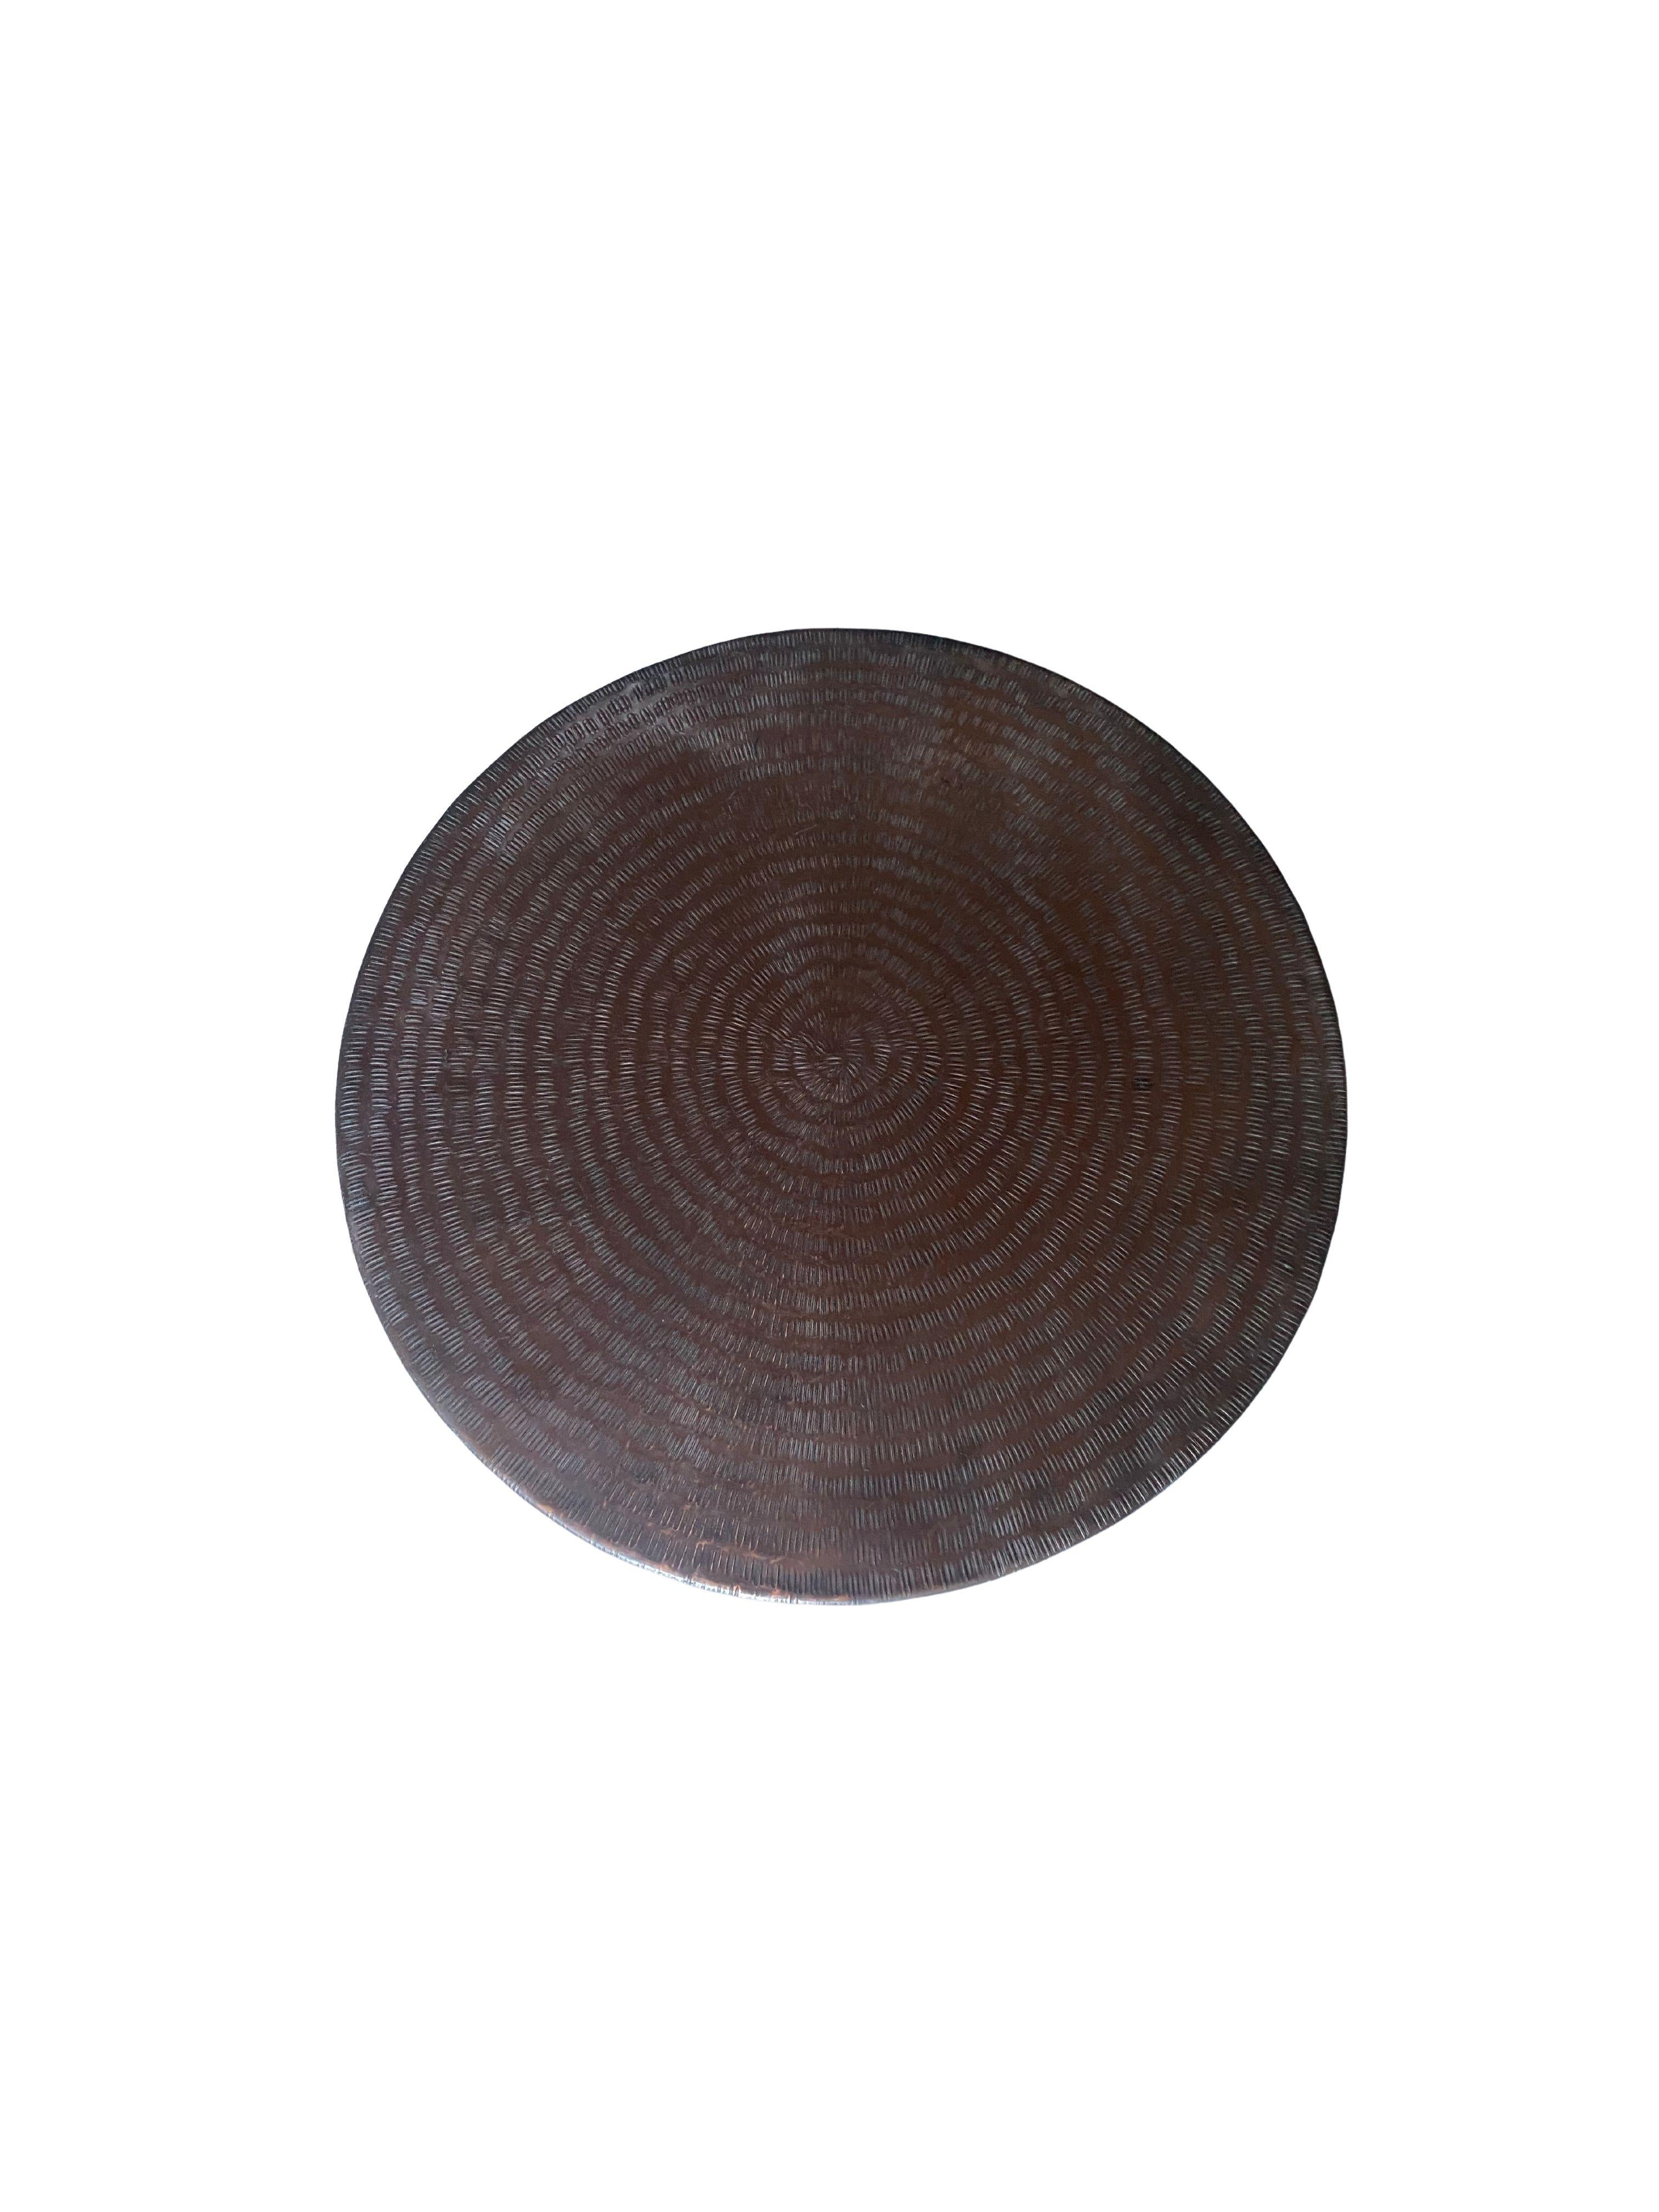 Contemporary Round Brass Side Table with Hammered Detailing